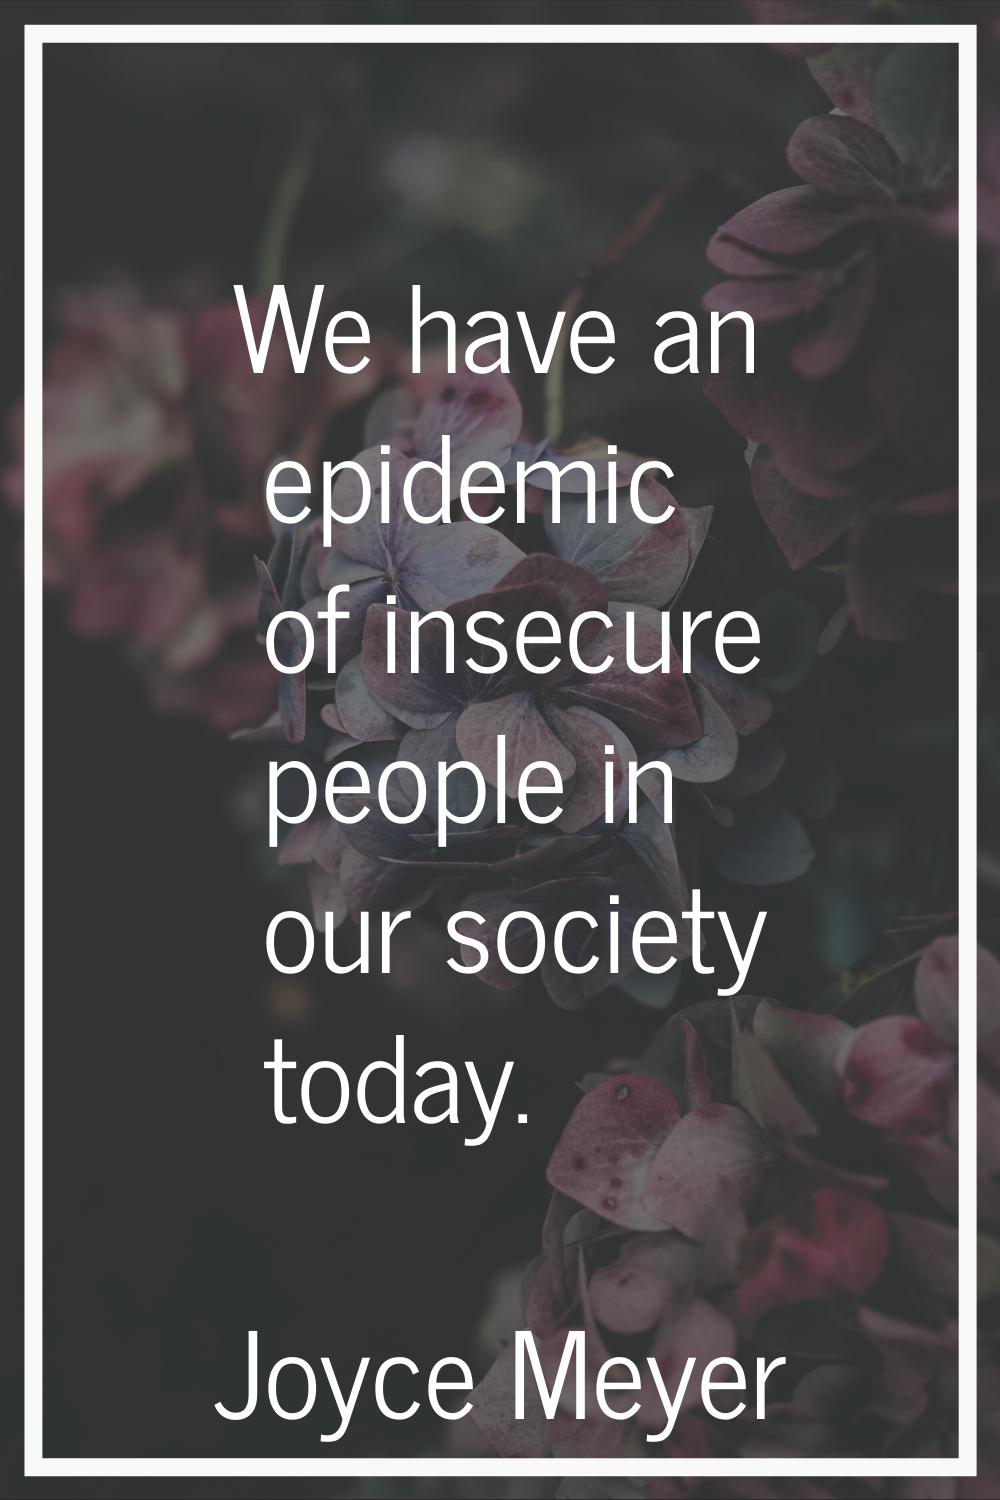 We have an epidemic of insecure people in our society today.